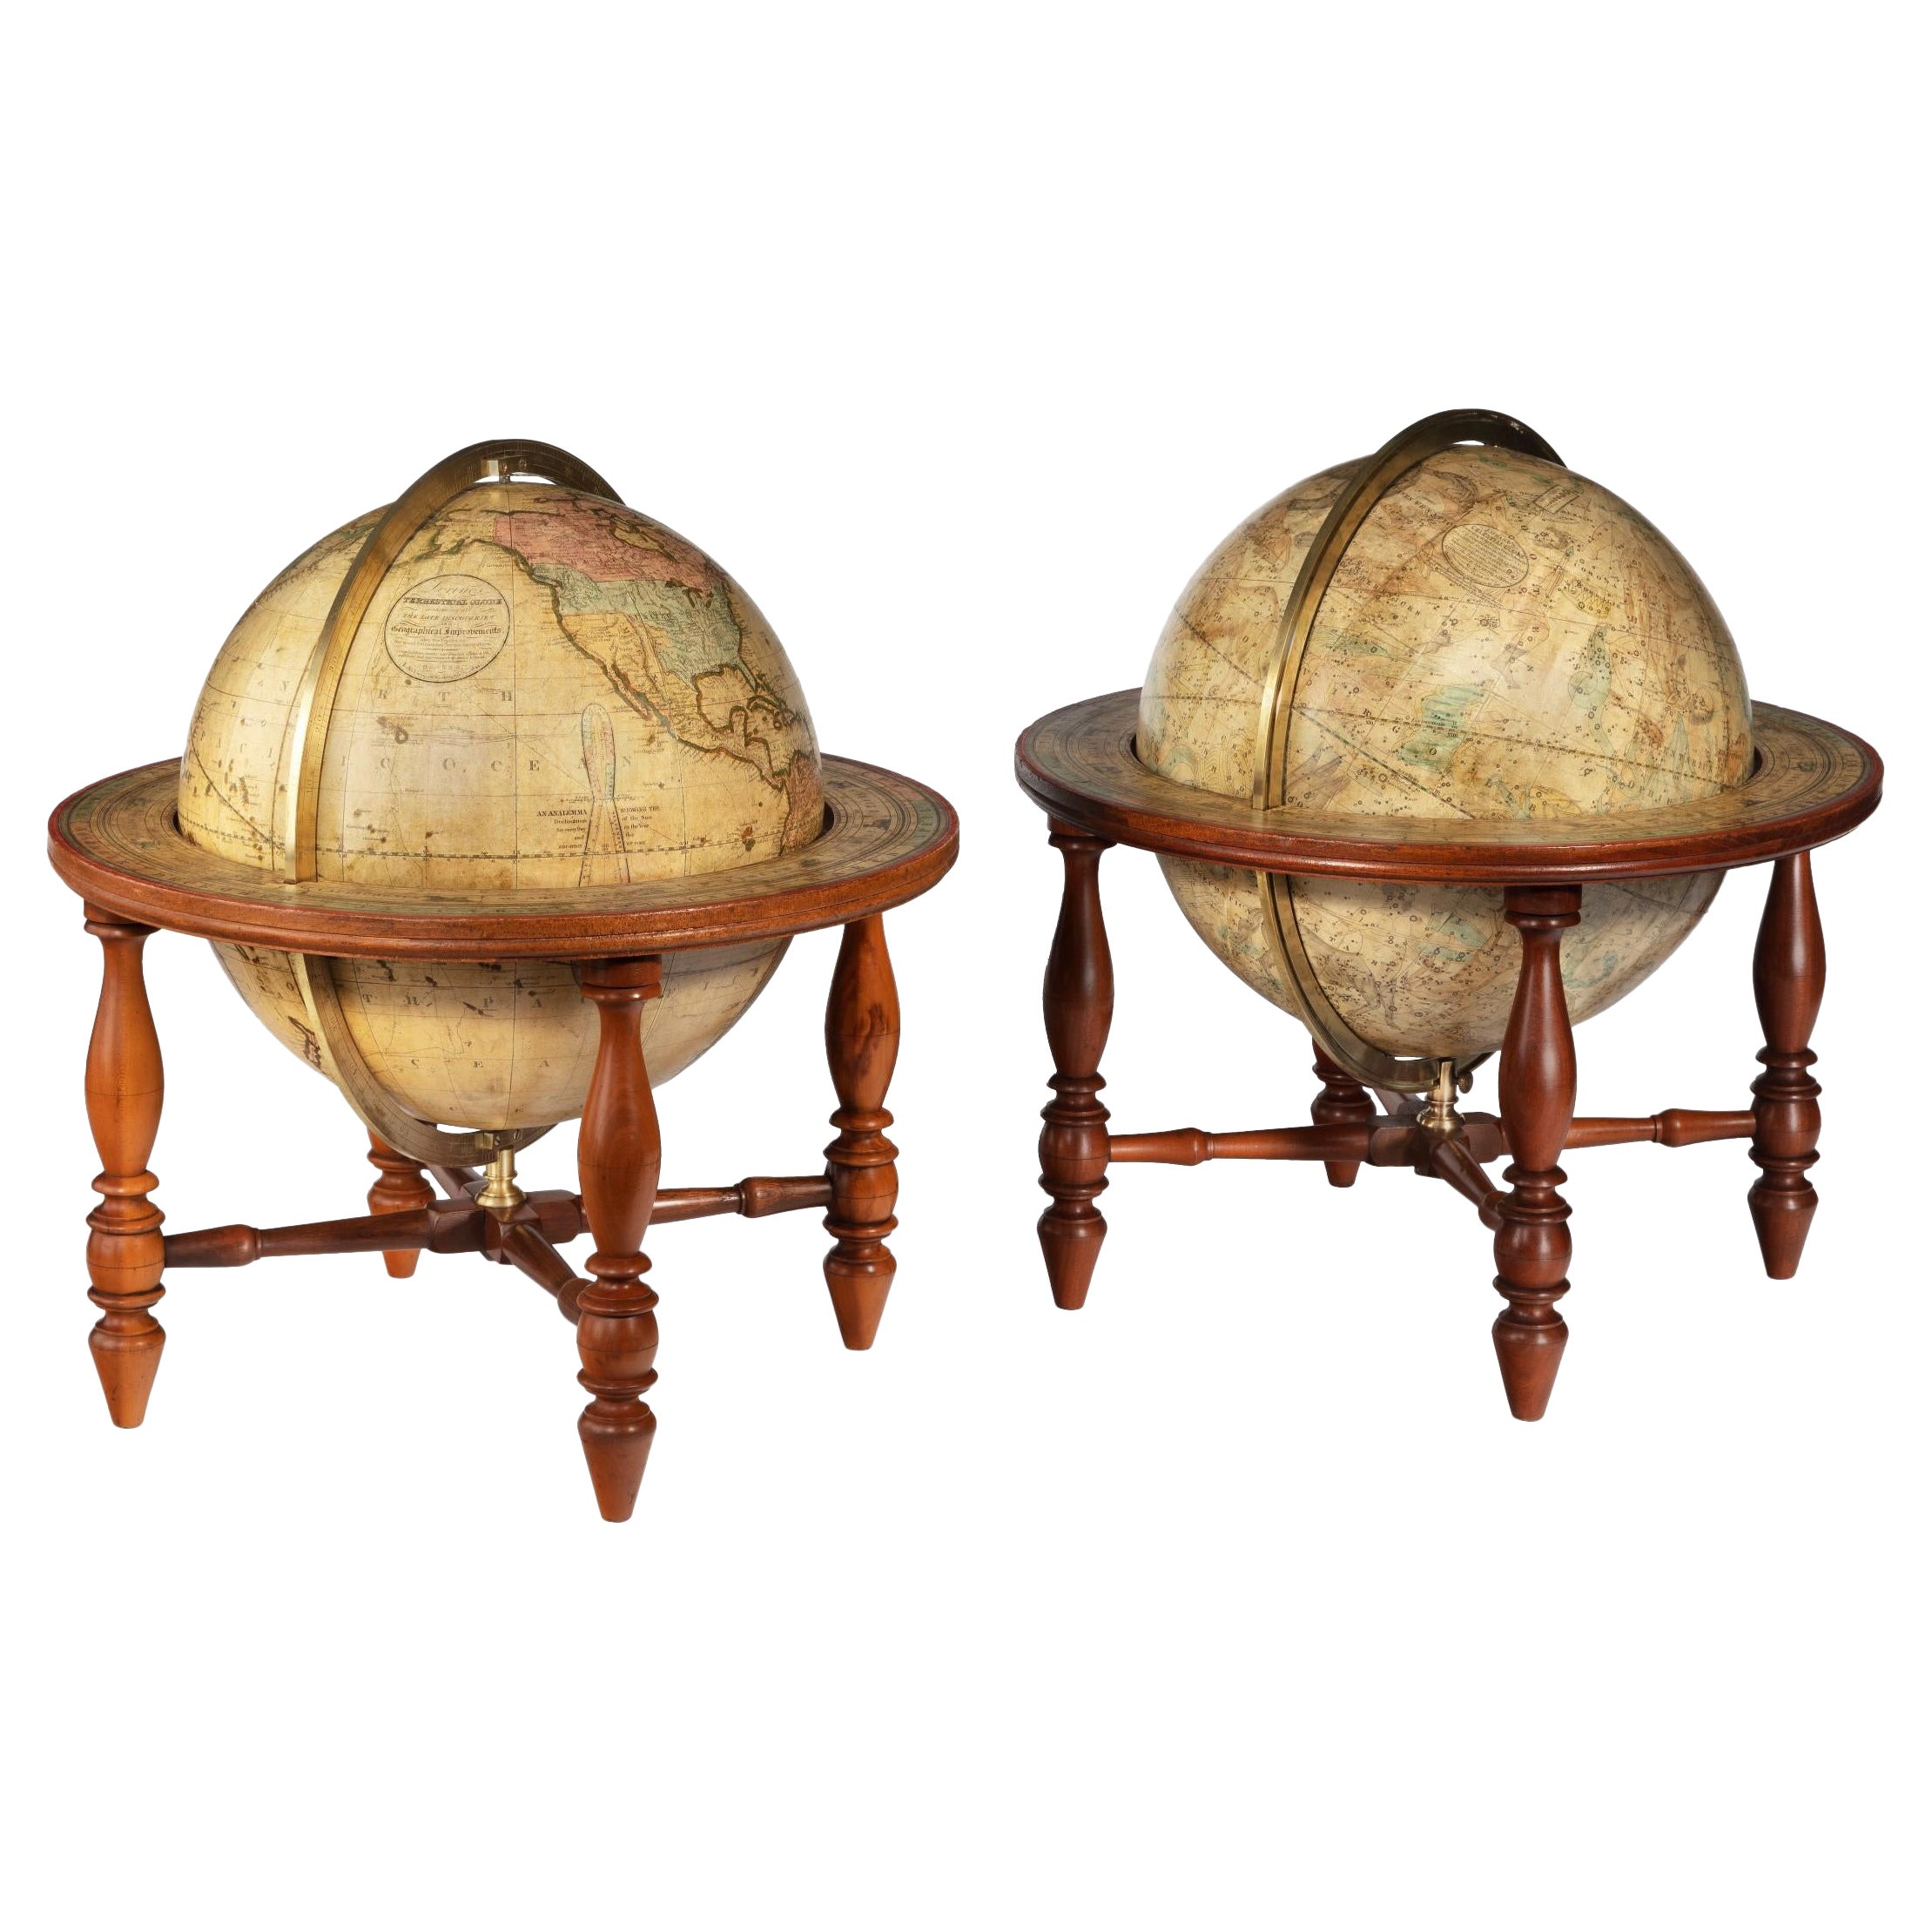 Pair of Table Globes by Josiah Loring, Dated 1844 and 1841